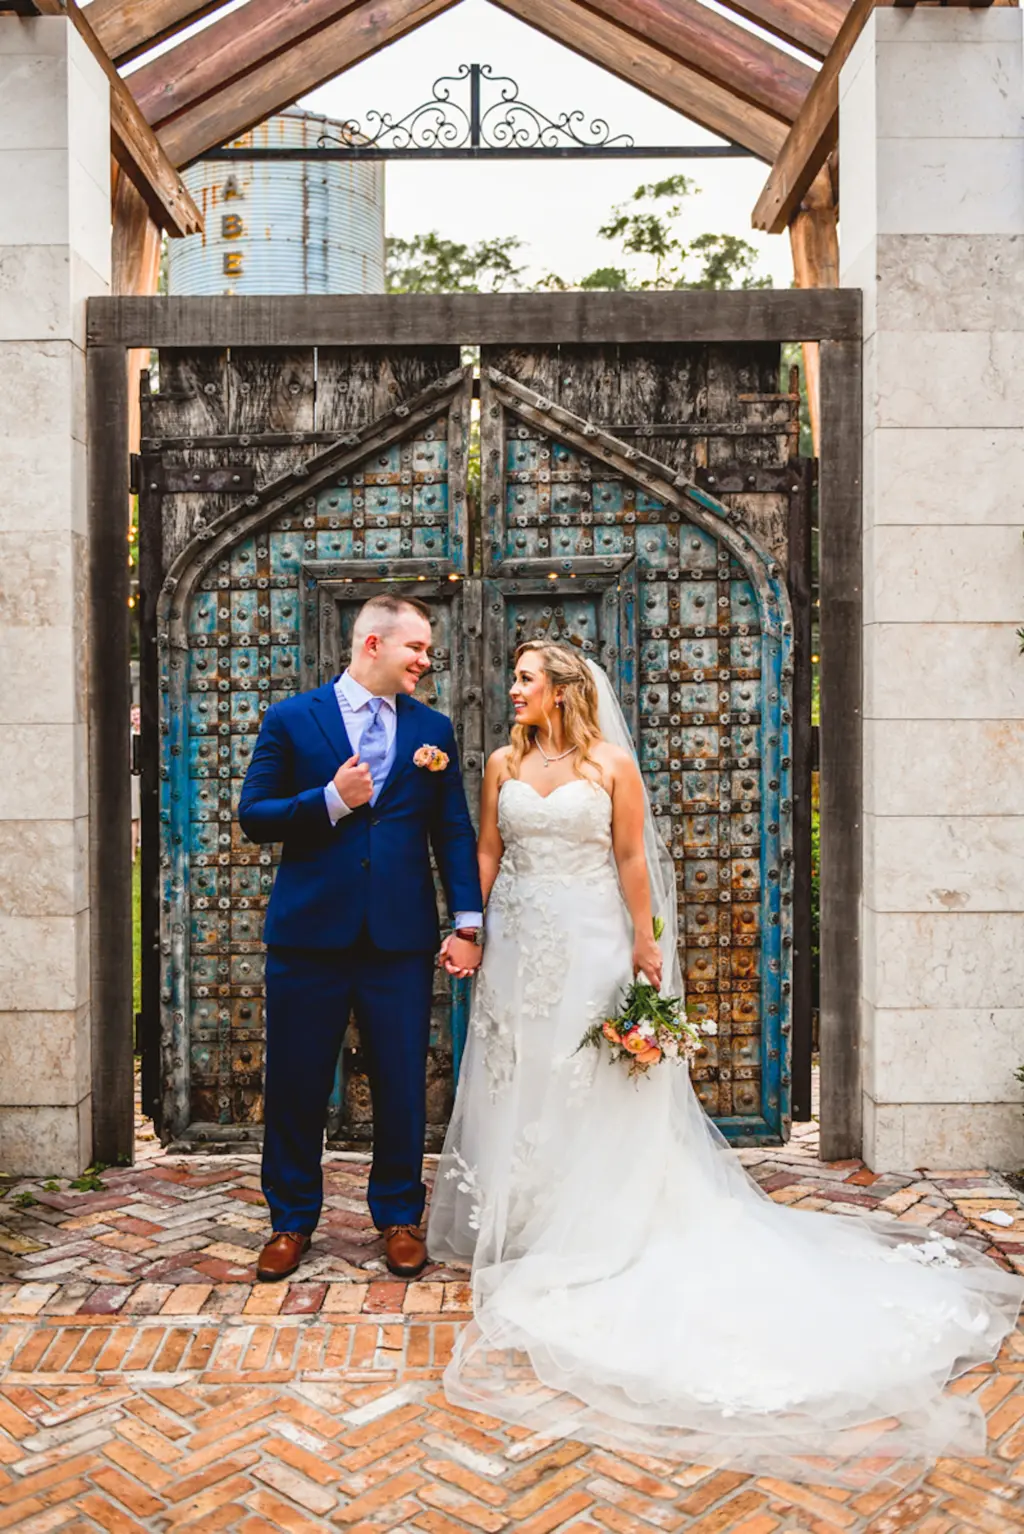 Bride and Groom Just Married | Ivory Strapless Tulle and Lace A-Line Wedding Dress Inspiration | Navy Suit with Blue Tie Ideas | Tampa Bay Event Venue Tabellas at Delaney Creek